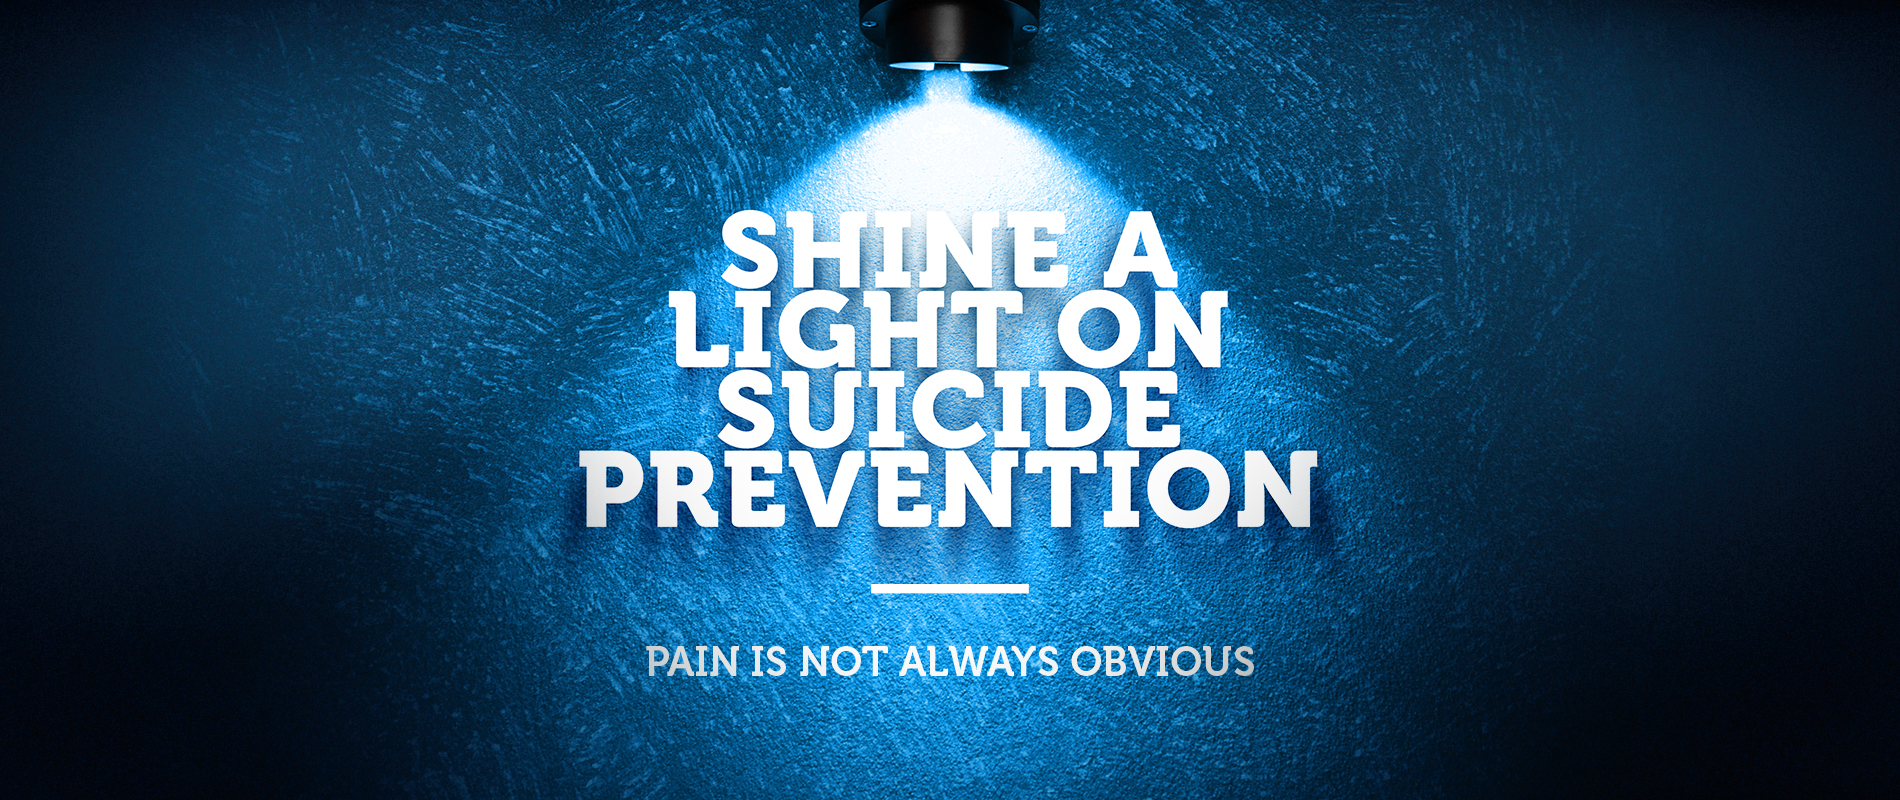 Shine a light on Suicide prevention